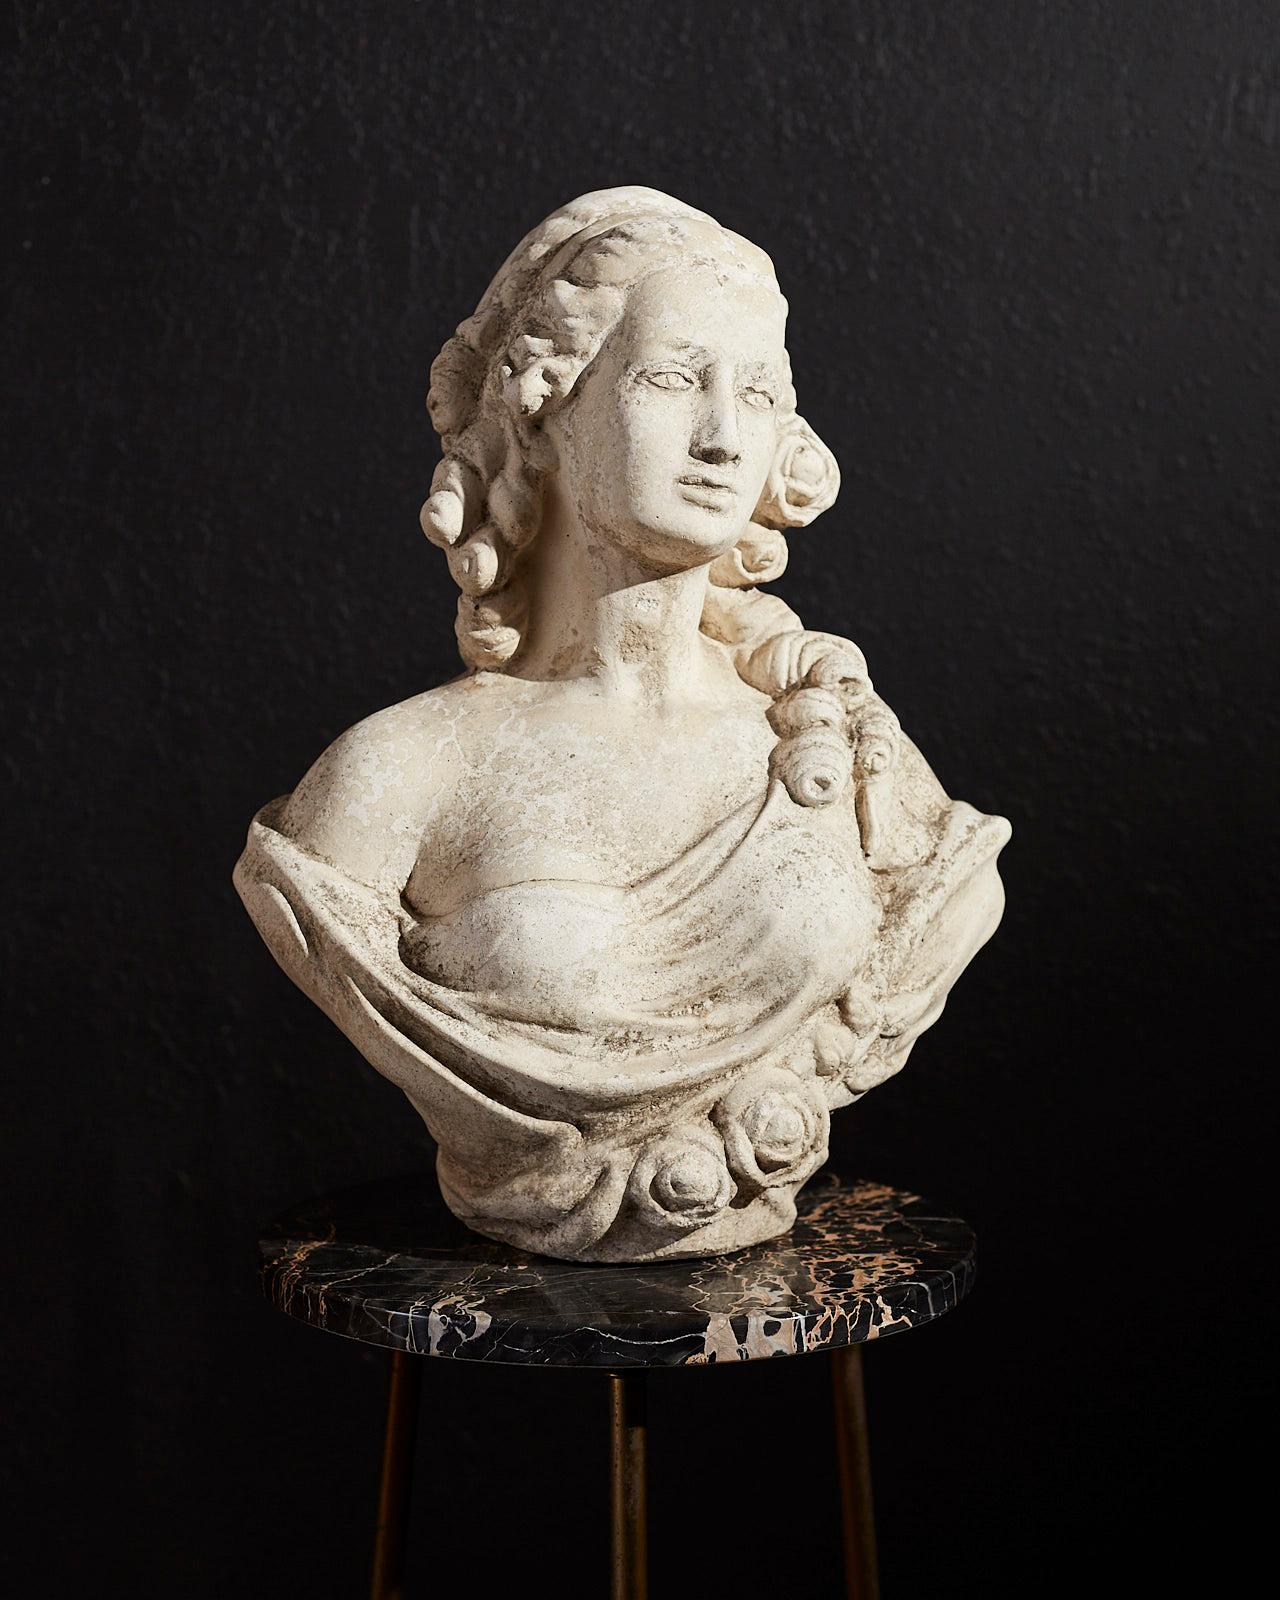 Beautiful cast stone garden bust sculpture of French Queen Marie Antoinette (1755-1793). Very heavy and solid with a lovely distressed patina of an aged marble piece. Depicted with curly locks of hair, roses on her dress and a mesmerizing gaze.